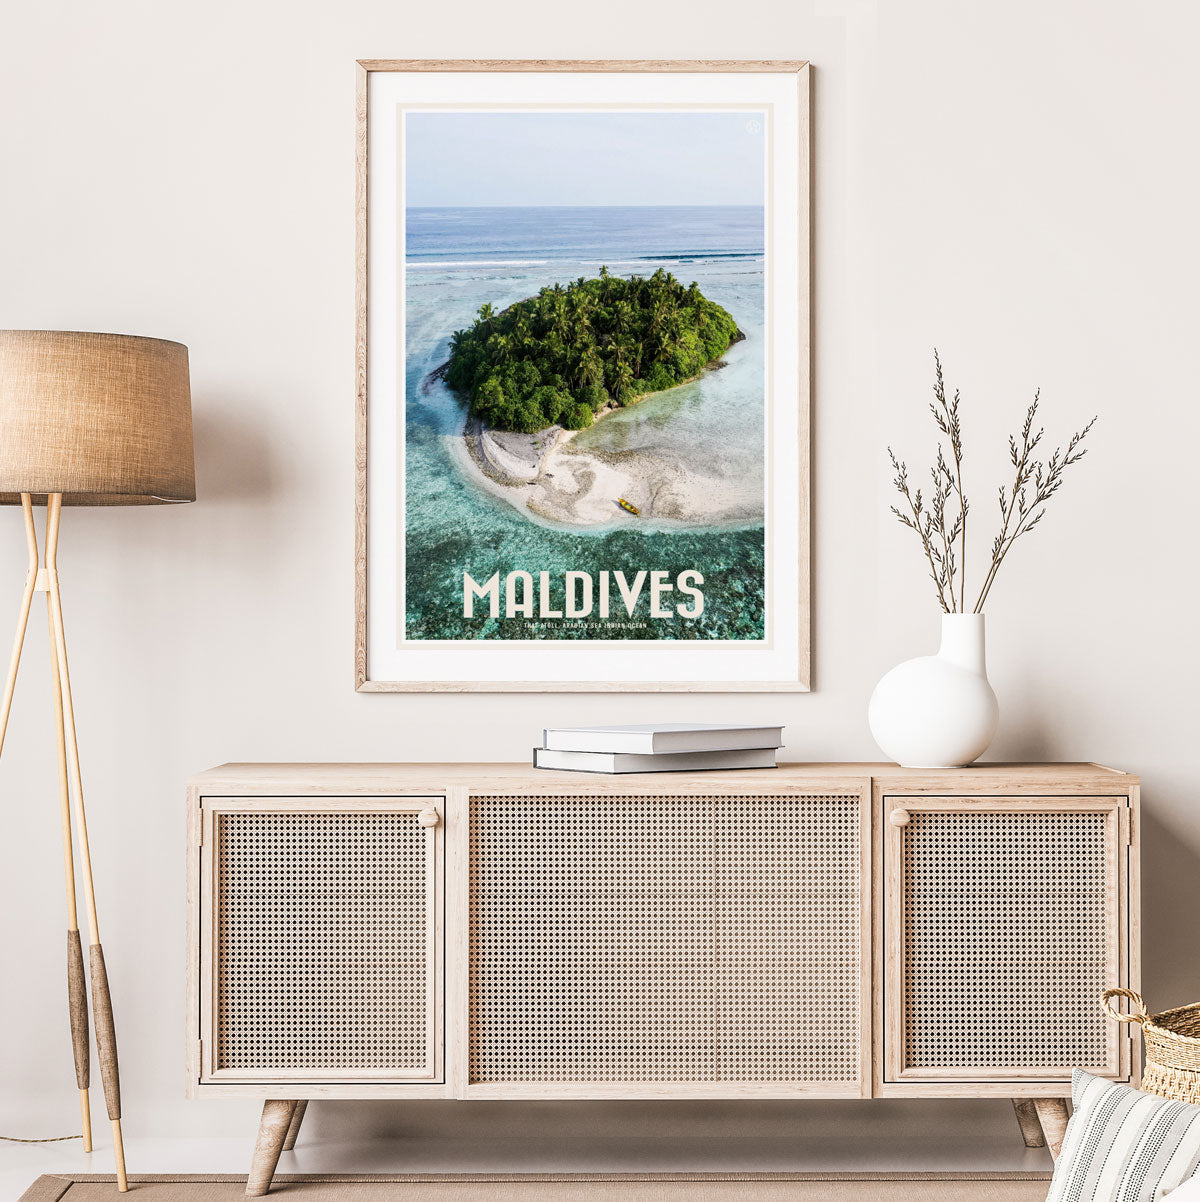 Maldives travel vintage style framed print by places we luv